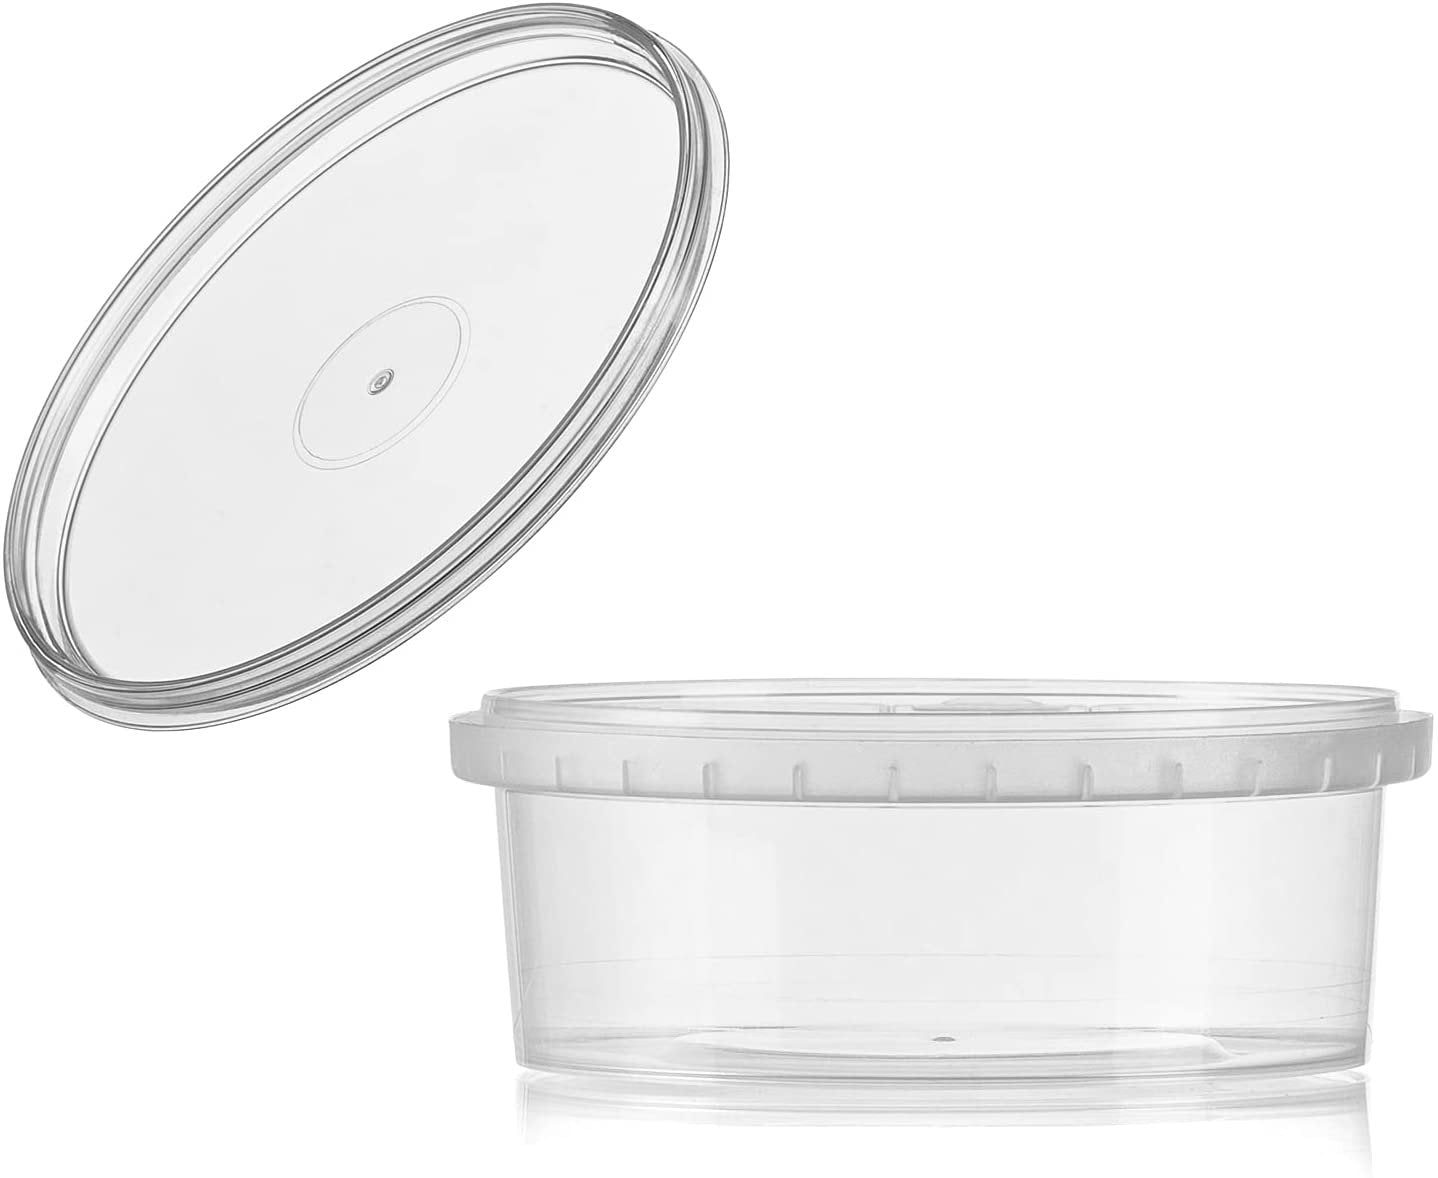  16-oz. Square Clear Deli Containers with Lids, Stackable,  Tamper-Proof BPA-Free Food Storage Containers, Recyclable Space Saver  Airtight Container for Kitchen Storage, Meal Prep, Take Out